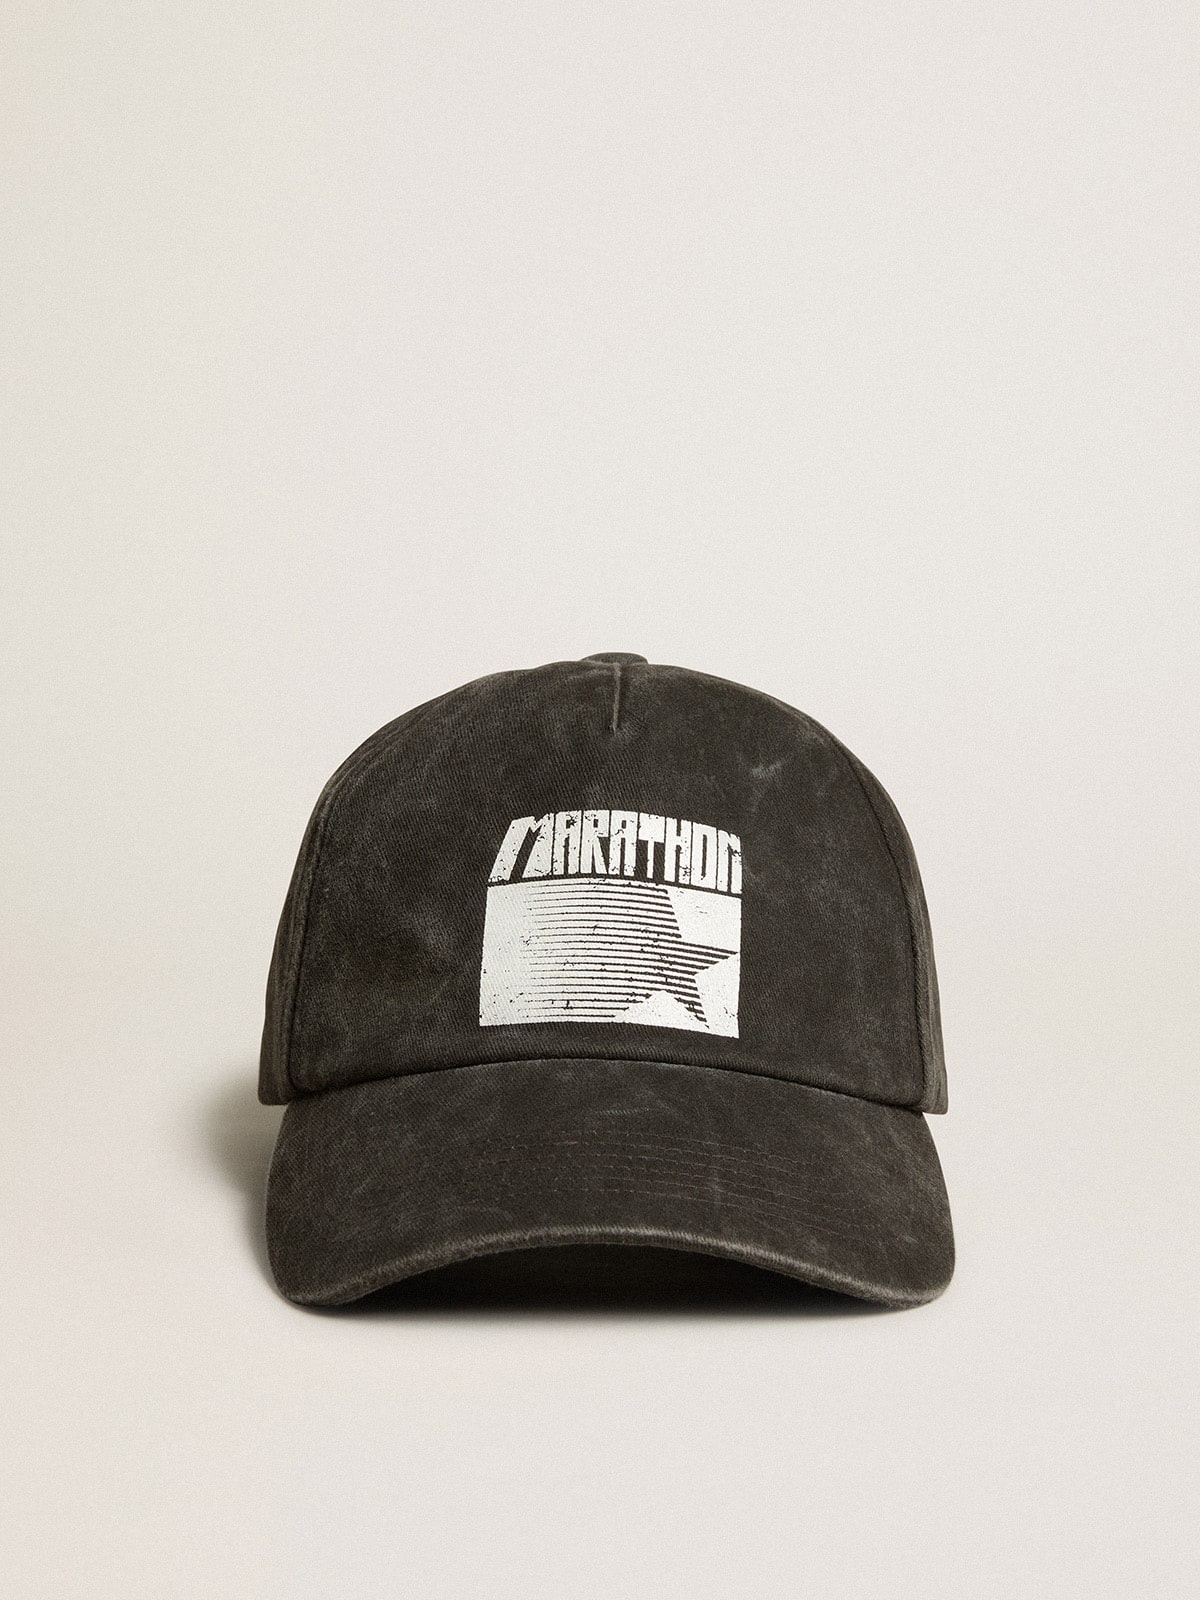 Anthracite gray cap with Marathon logo on the front - 1